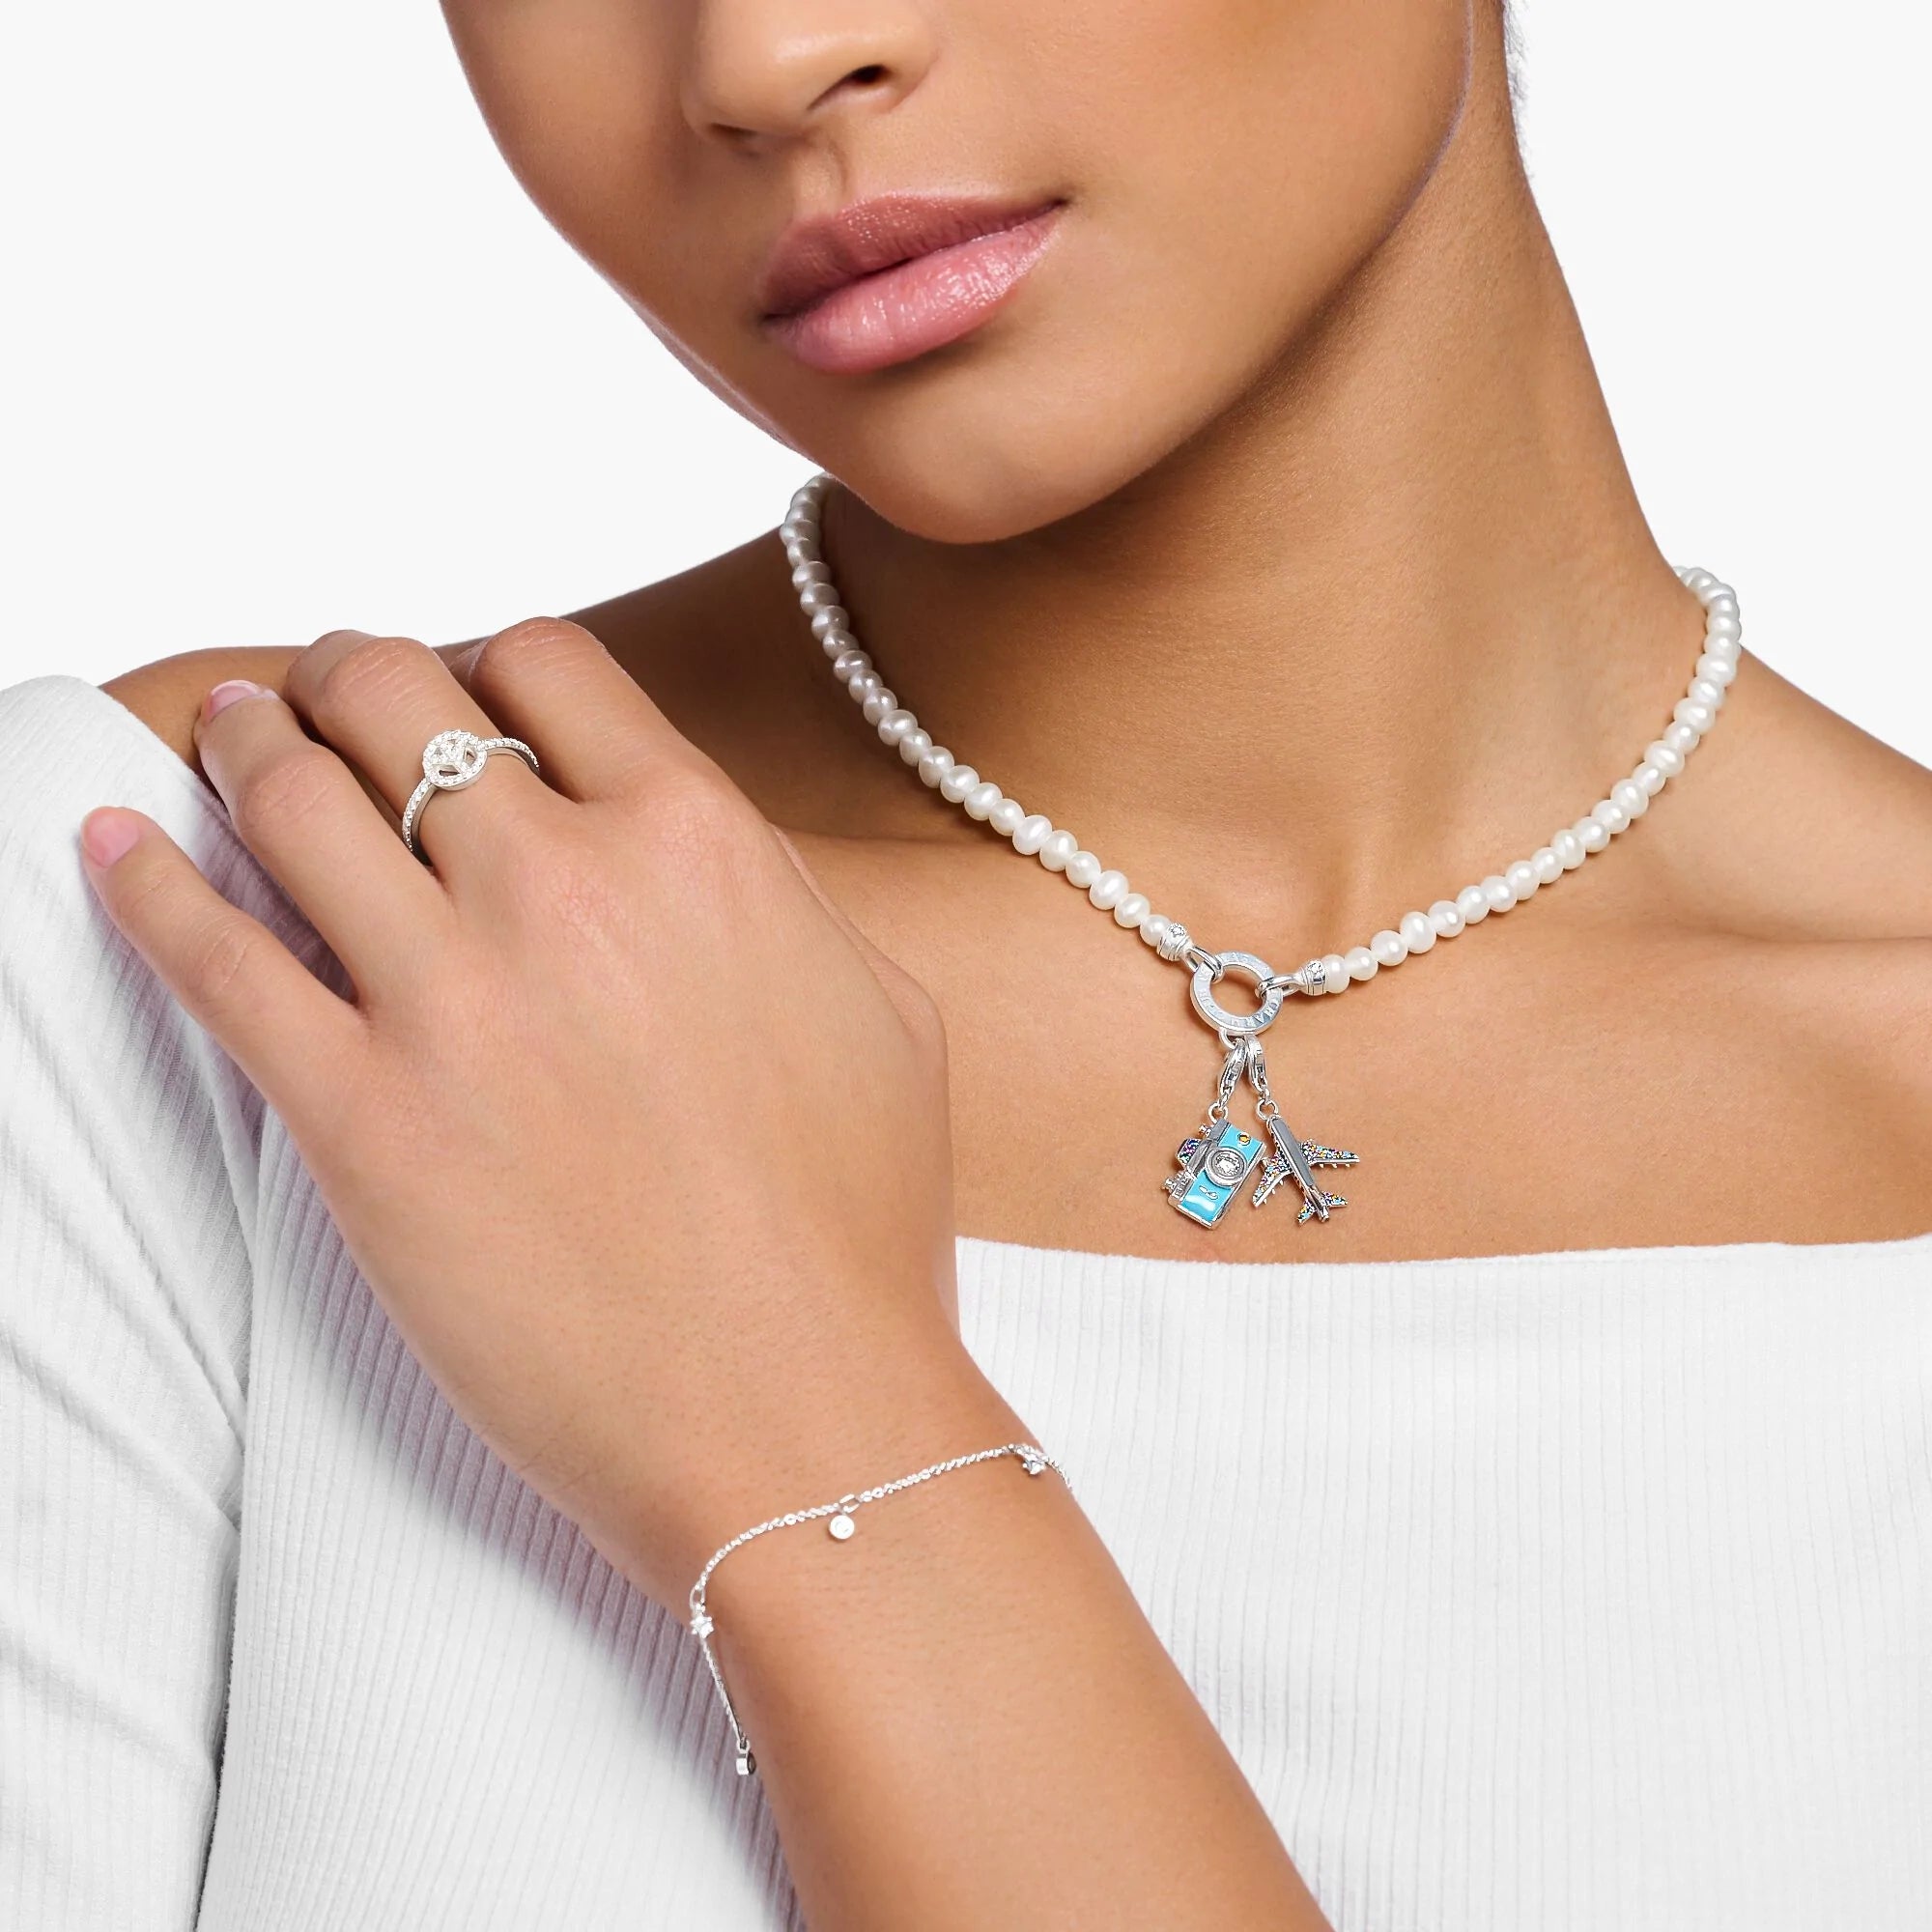 Thomas Sabo Necklace pearl star silver - Turriff Jewellers